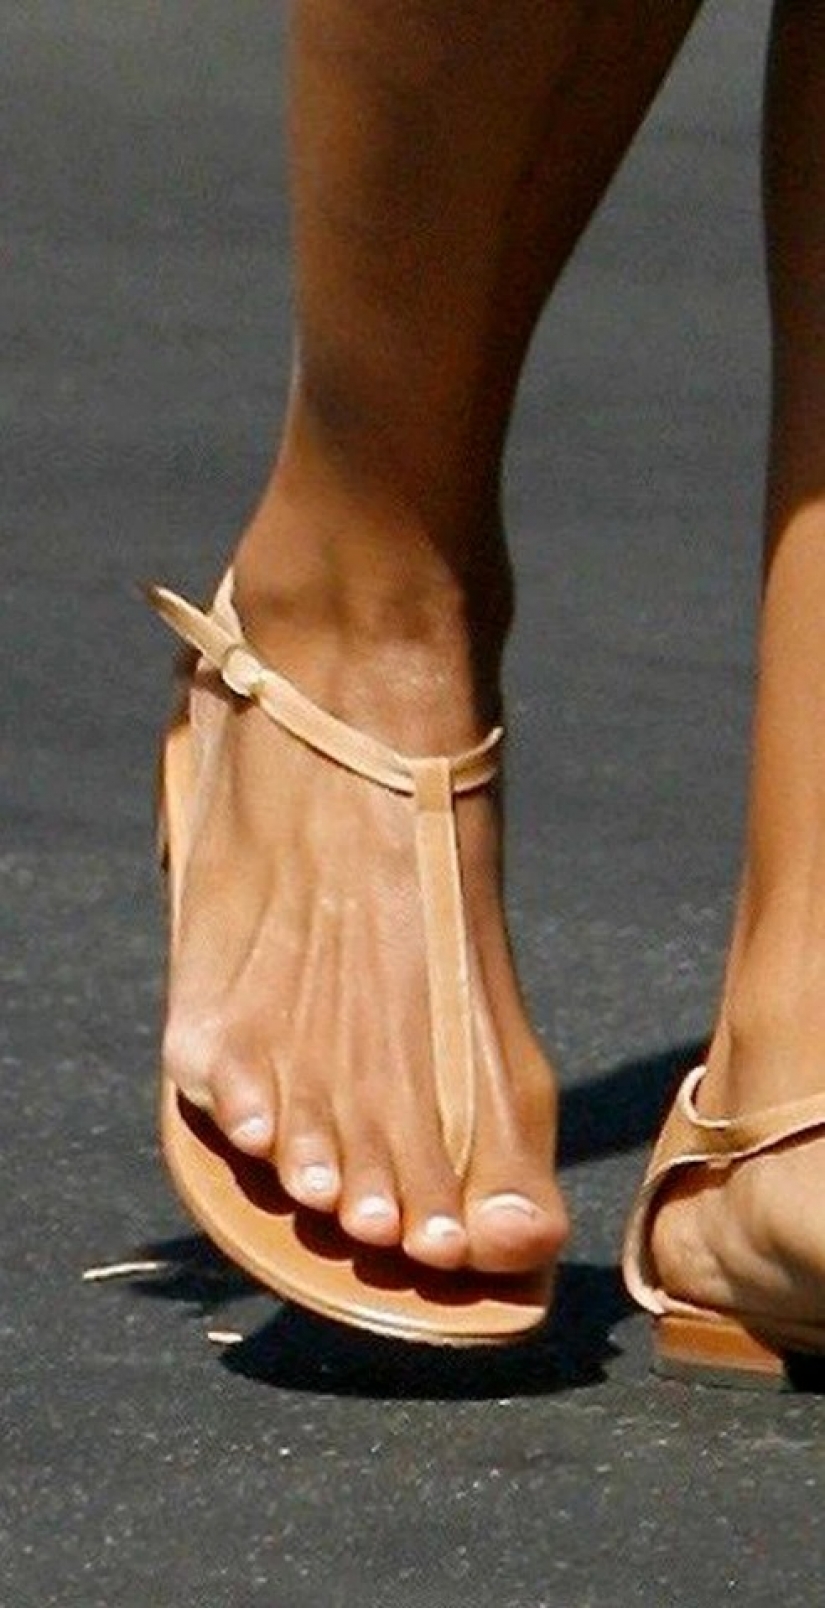 Bottom view: Guess which celebrities have toes in the photos